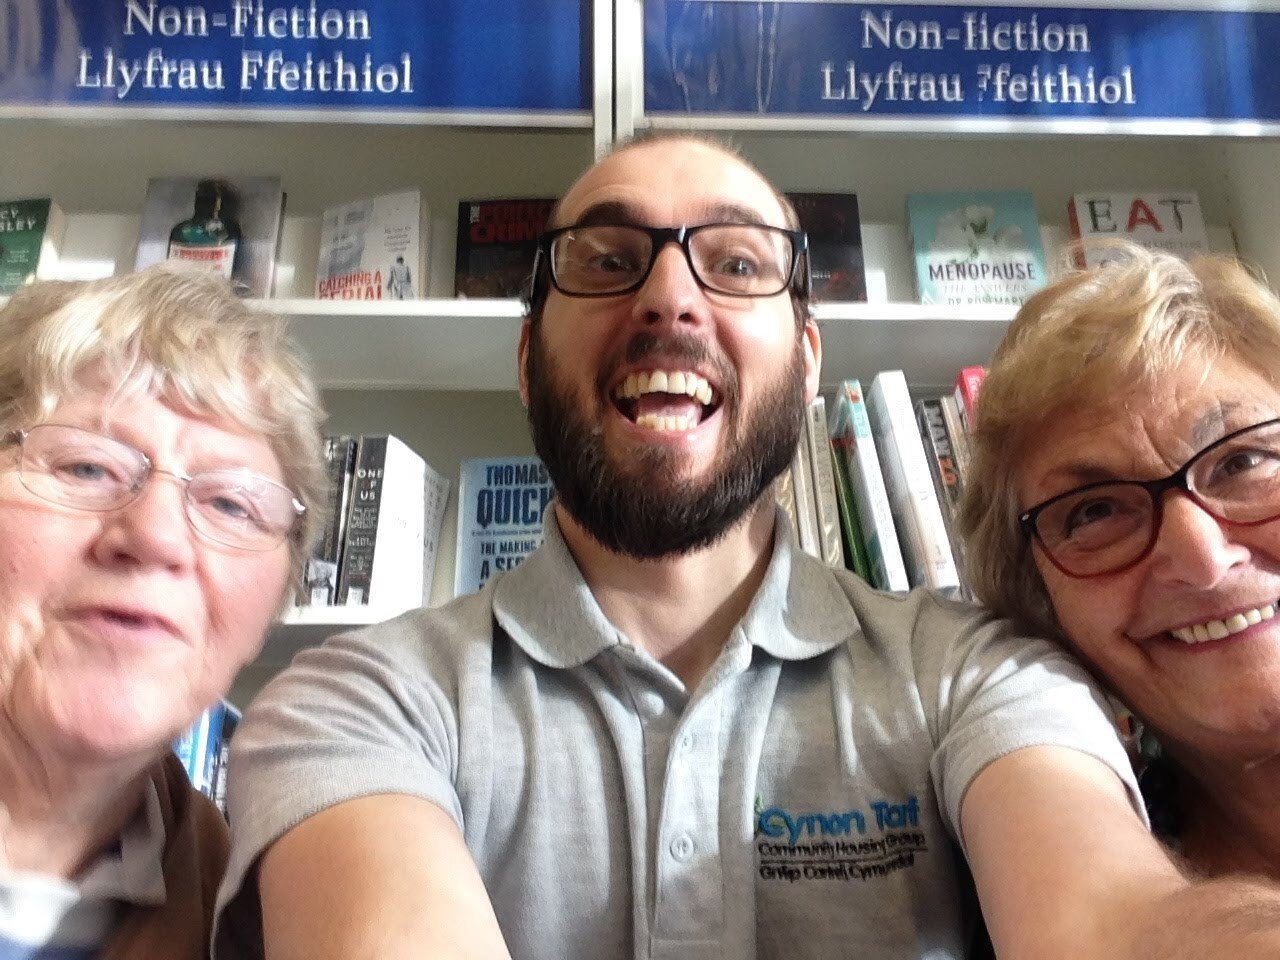 A selfie photograph of three people. In the middle is Rhys Norris of Cynon Taff Housing smiling at the camera. Either side of him are two senior women whole are also smiling. In the background are shelves of library books, the sign above the books reads 'Non-Fiction, Llyfrau Ffeithiol'